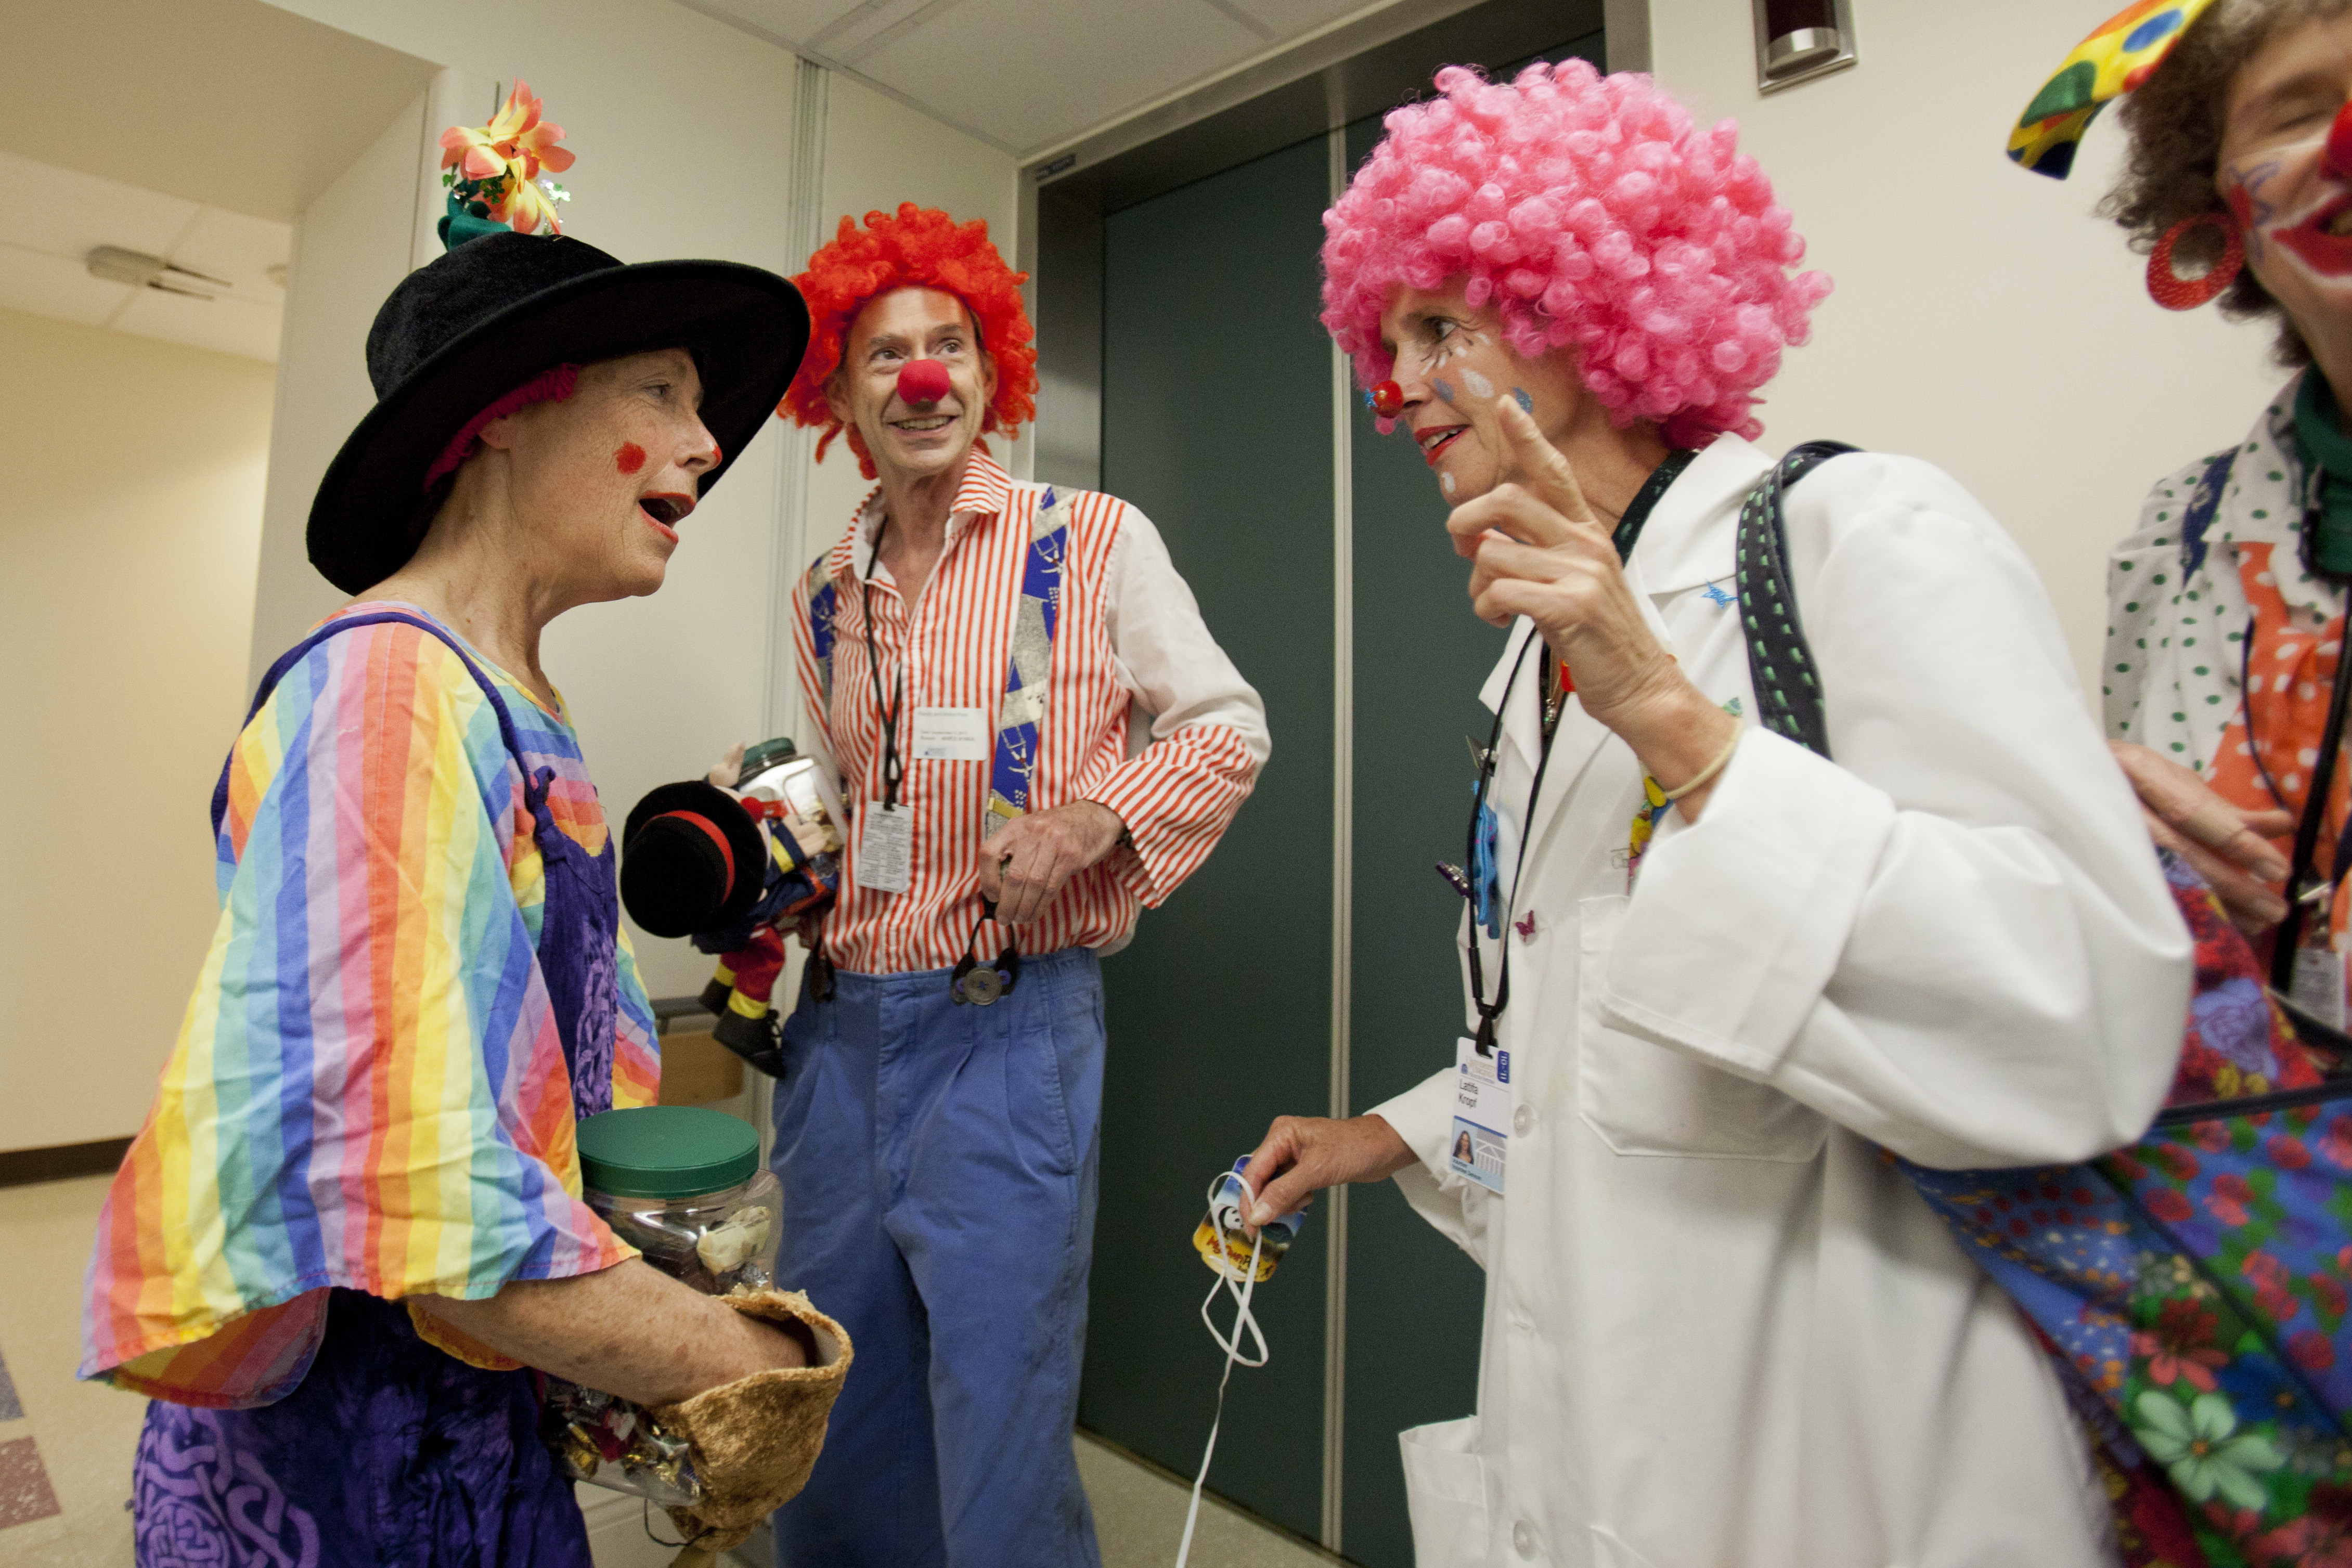 People dressed up as clowns talk in the hallway of the UVA Hospital